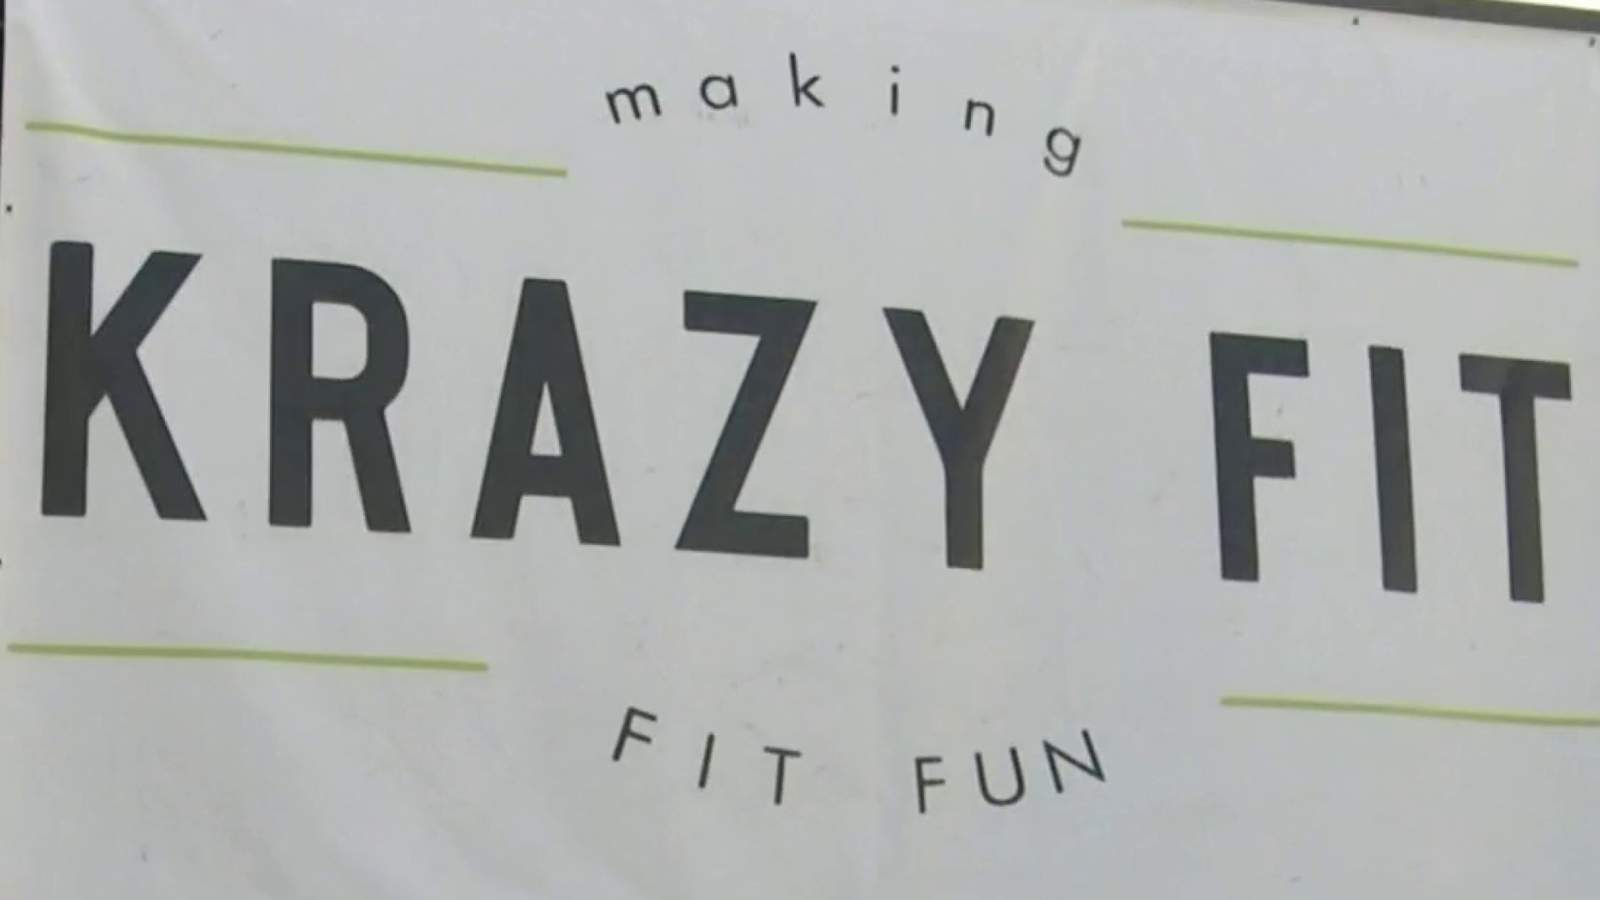 Here’s a fun way to get Krazy Fit!